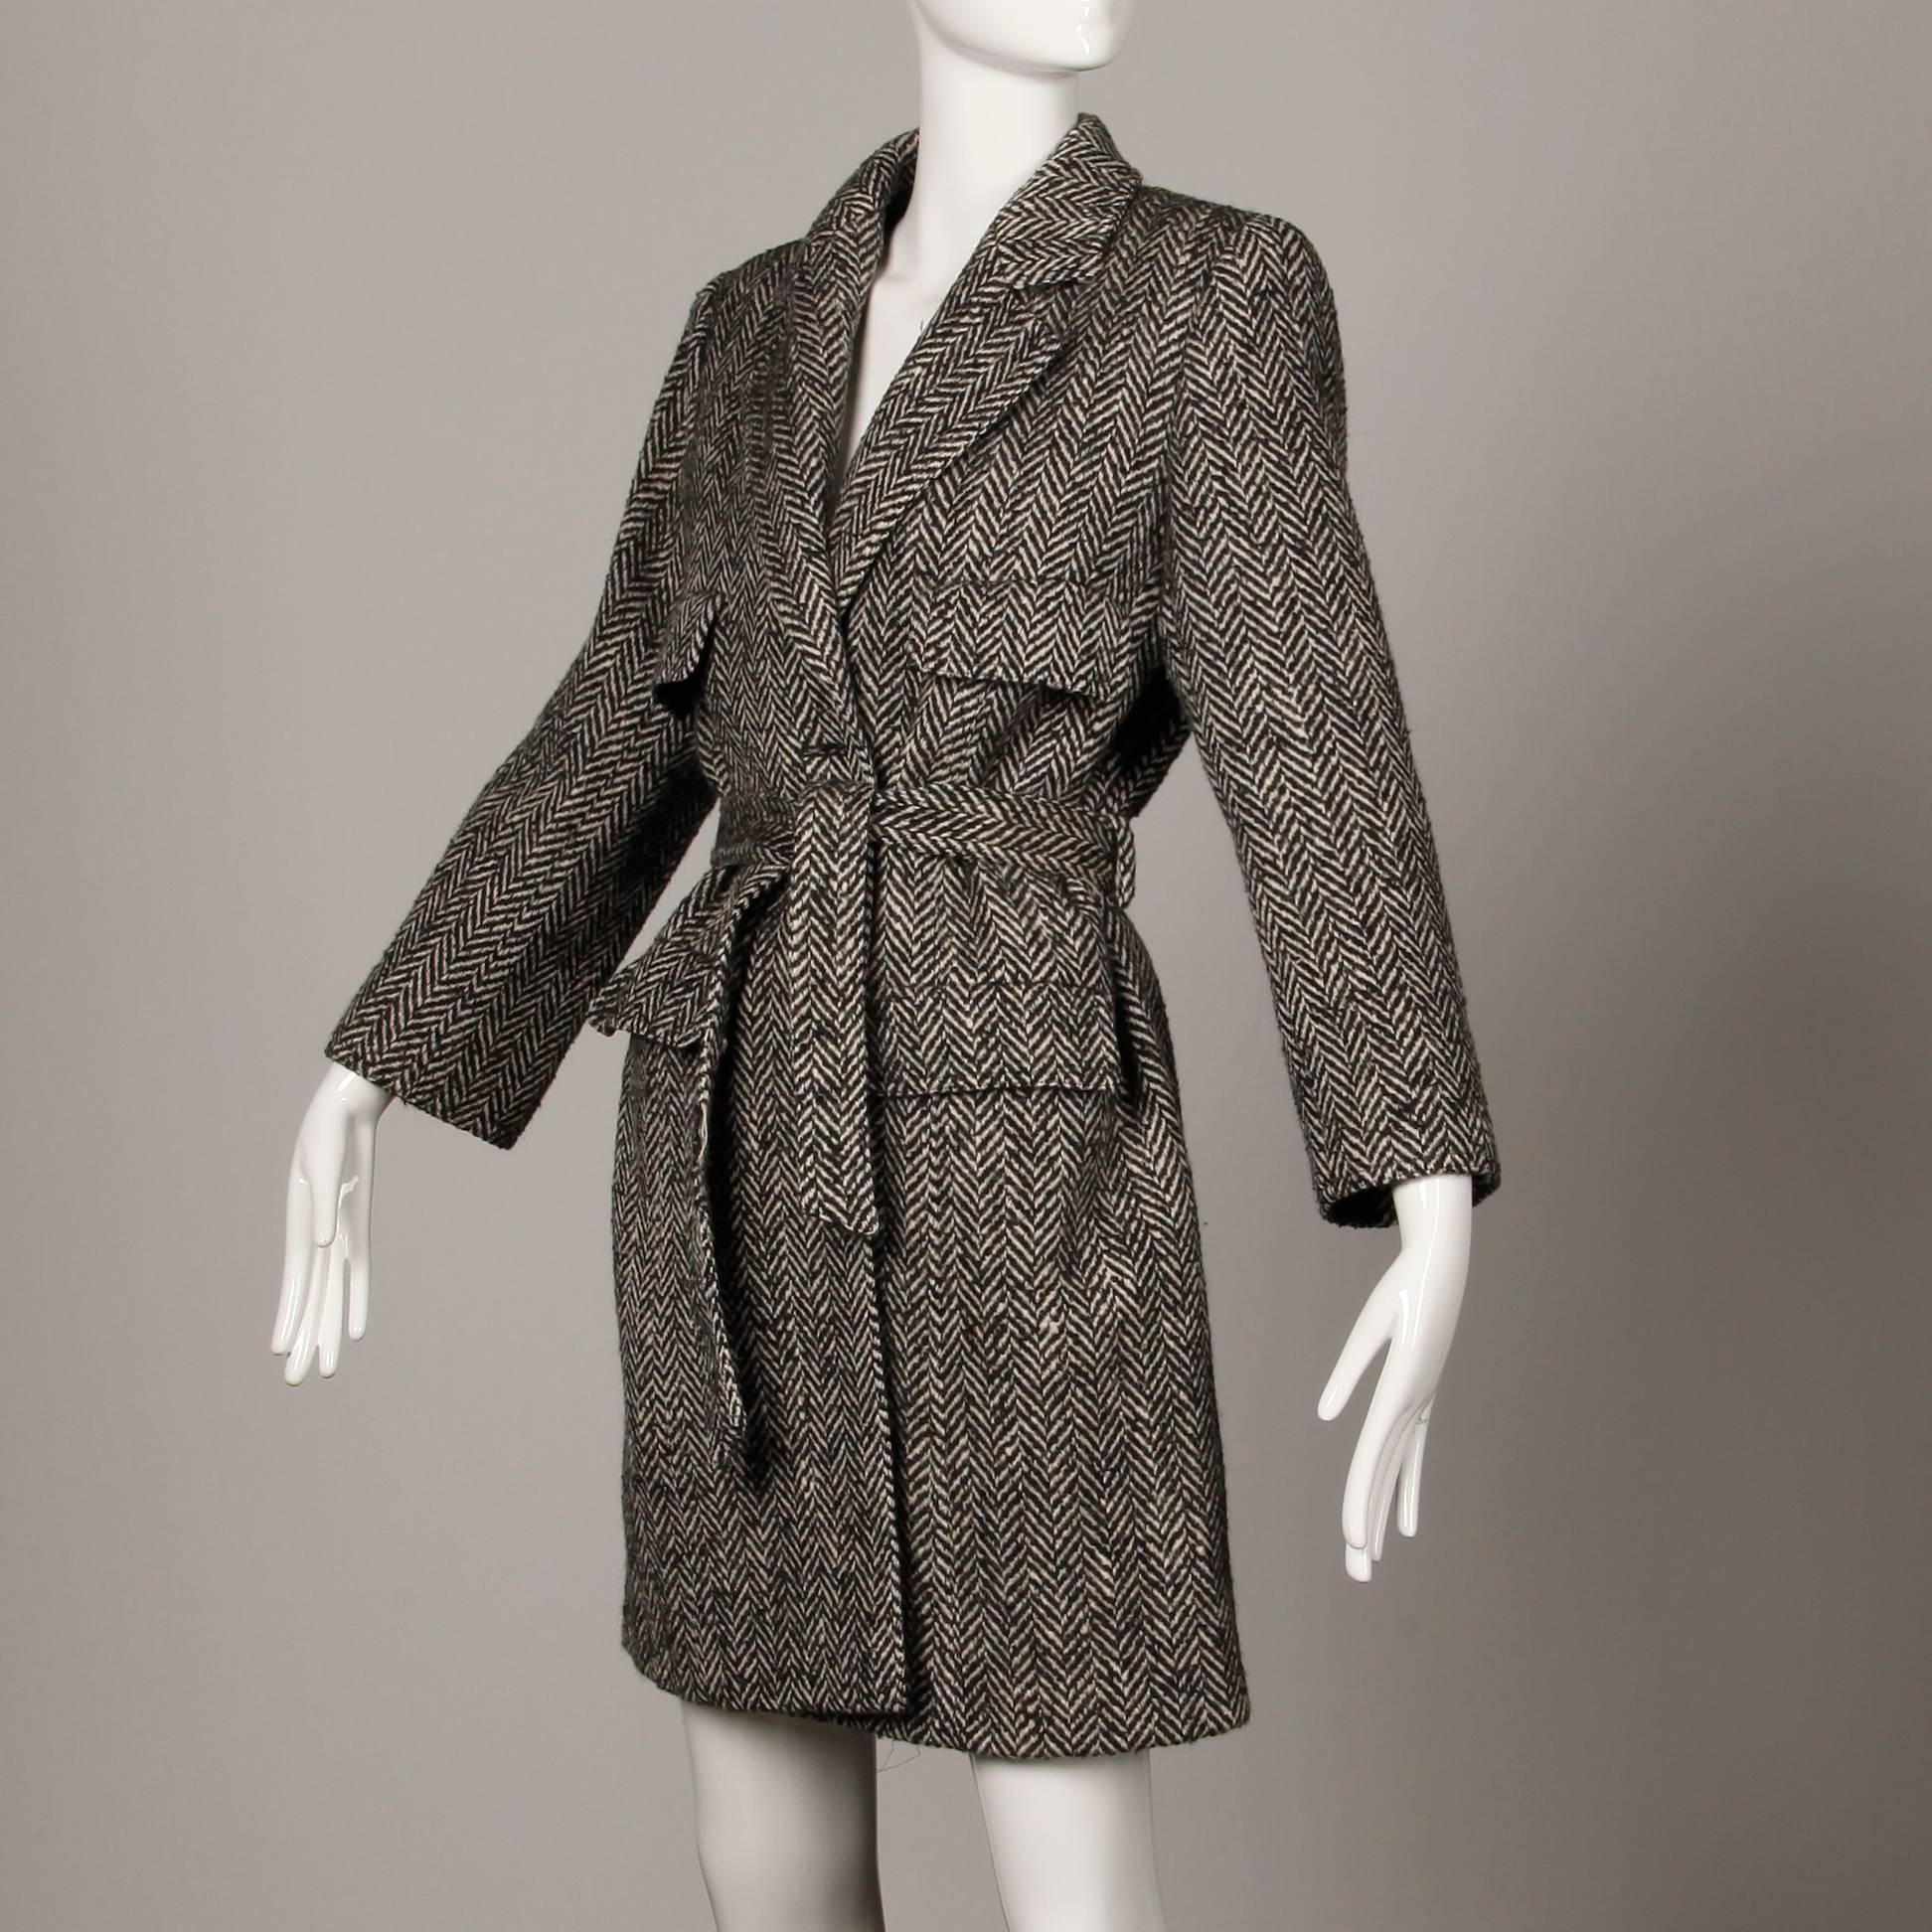 Valentino Vintage Black + White Heringbone Wool Coat with Sash Belt In Excellent Condition For Sale In Sparks, NV